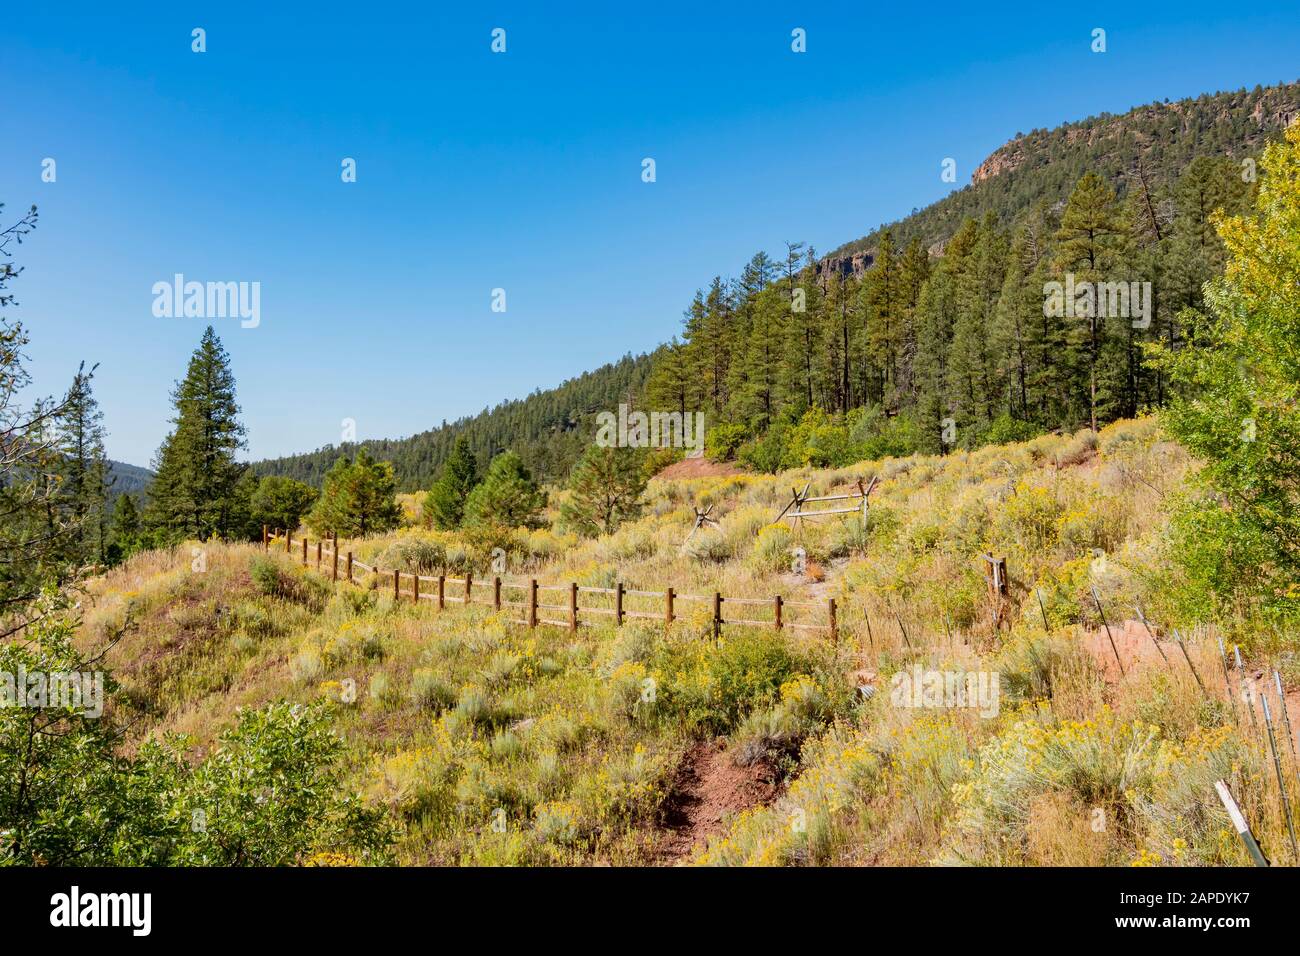 Morning view of the beautiful Valles Caldera National Preserve area at New Mexico Stock Photo